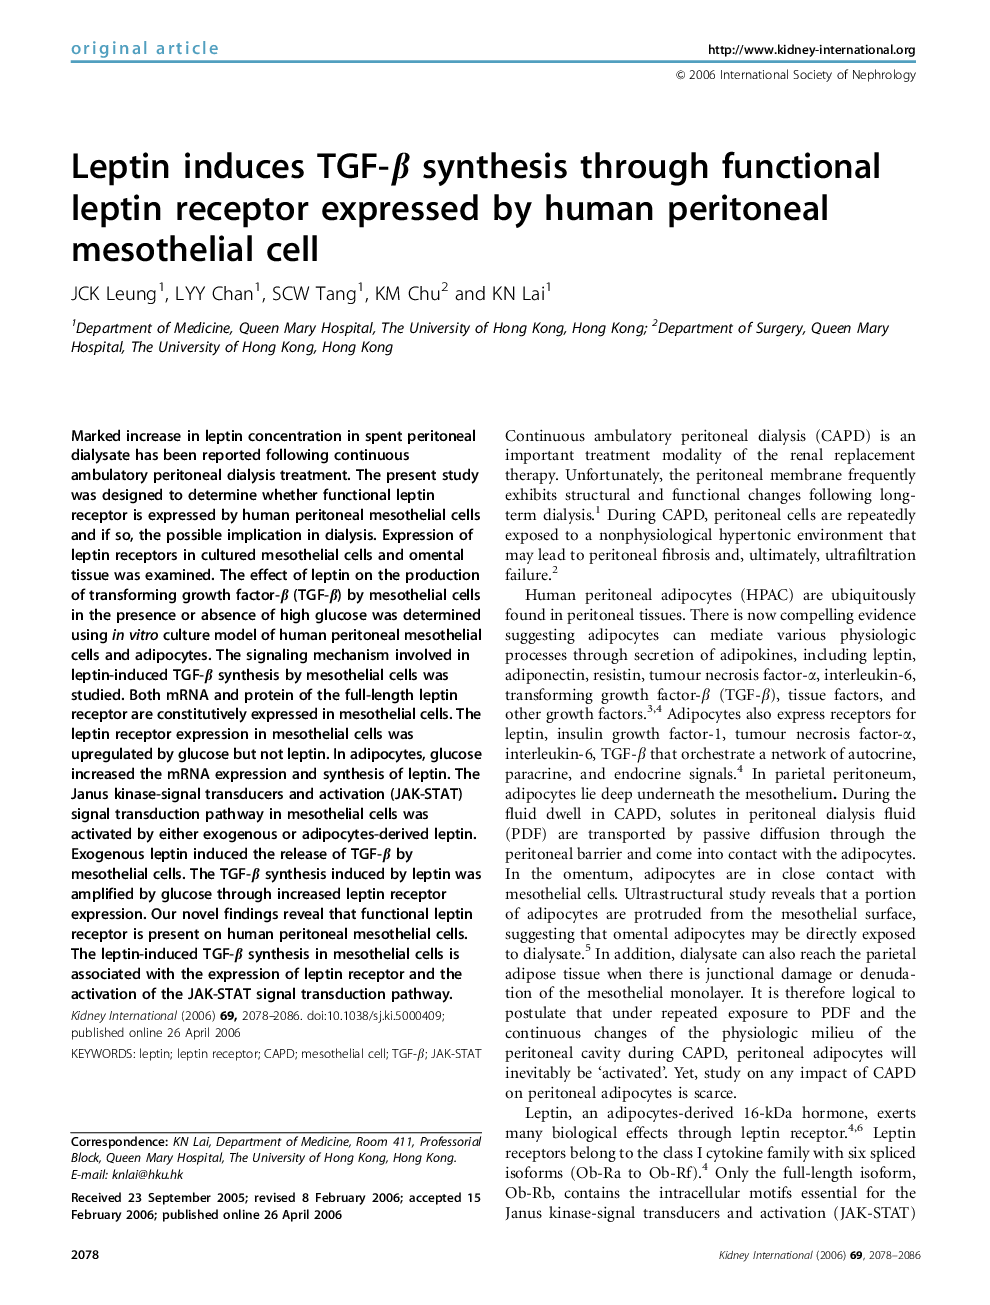 Leptin induces TGF-β synthesis through functional leptin receptor expressed by human peritoneal mesothelial cell